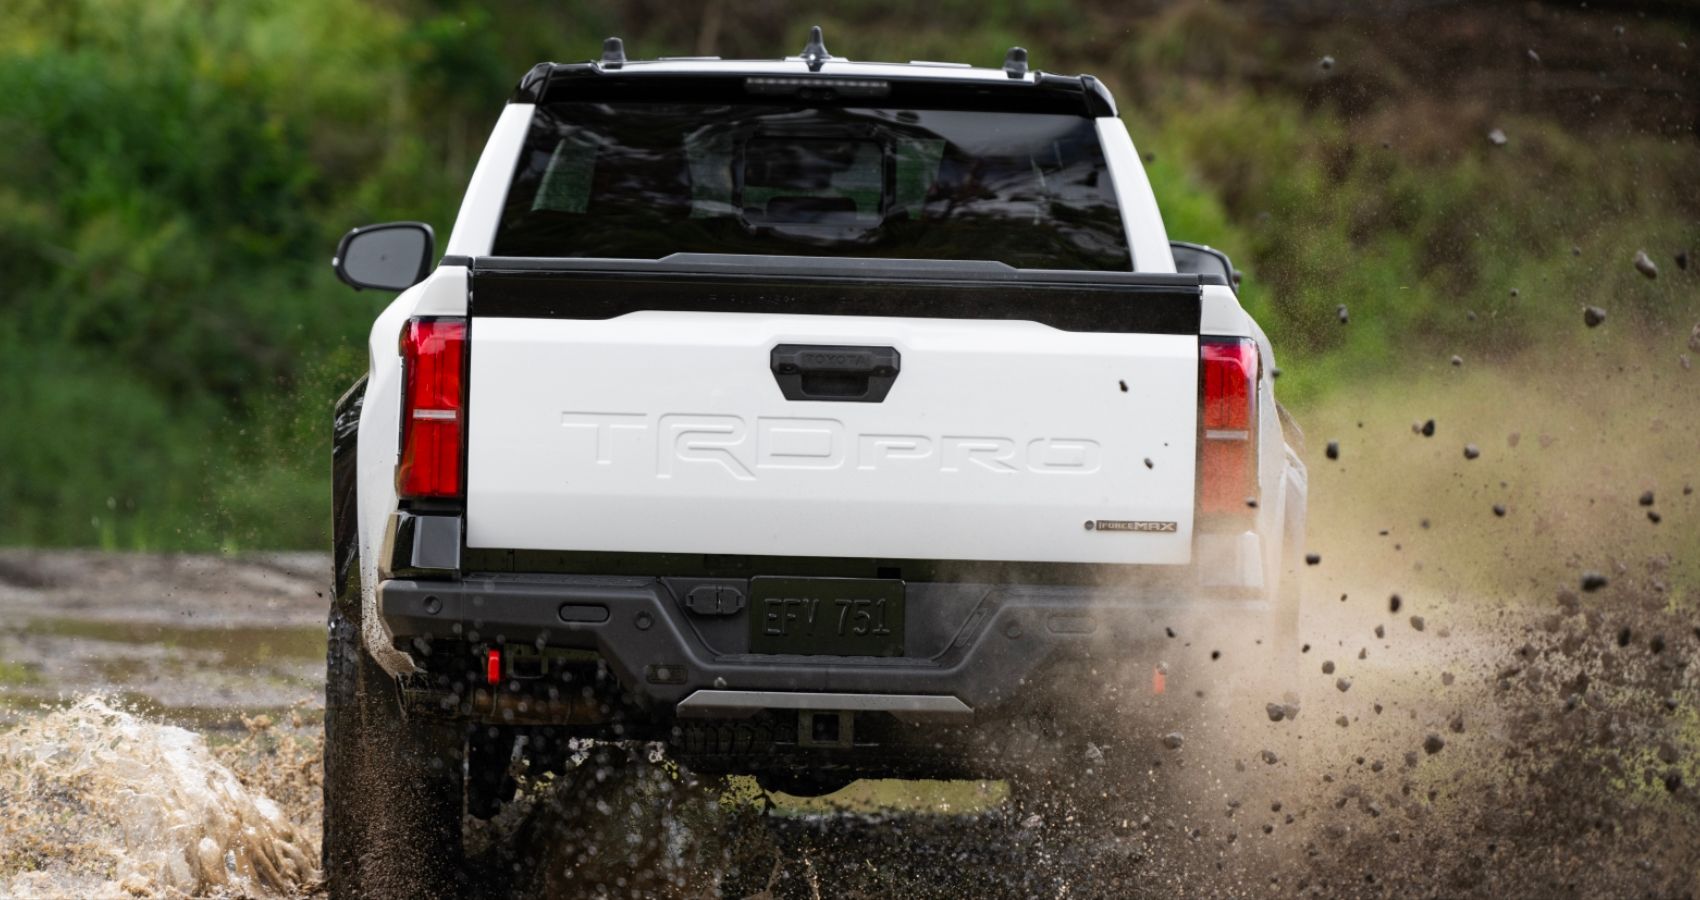 TRD OffRoad Vs TRD Pro Which Is Right For You?